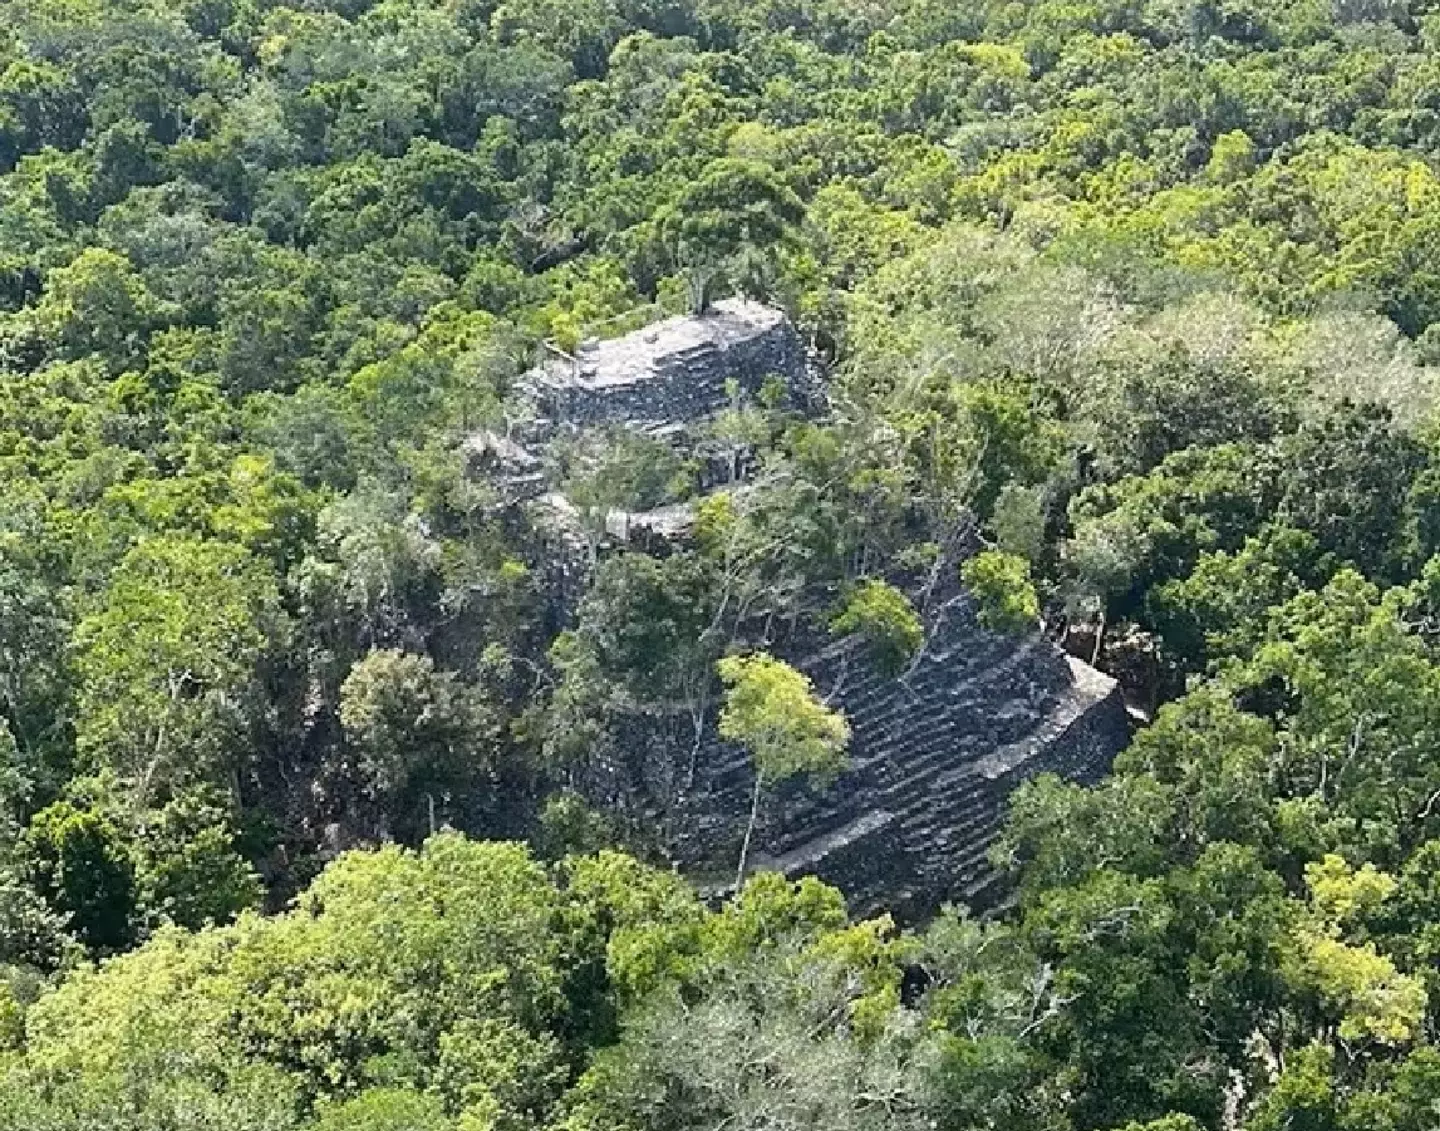 The true size of the ancient Mayan city had previously been masked by the jungle.